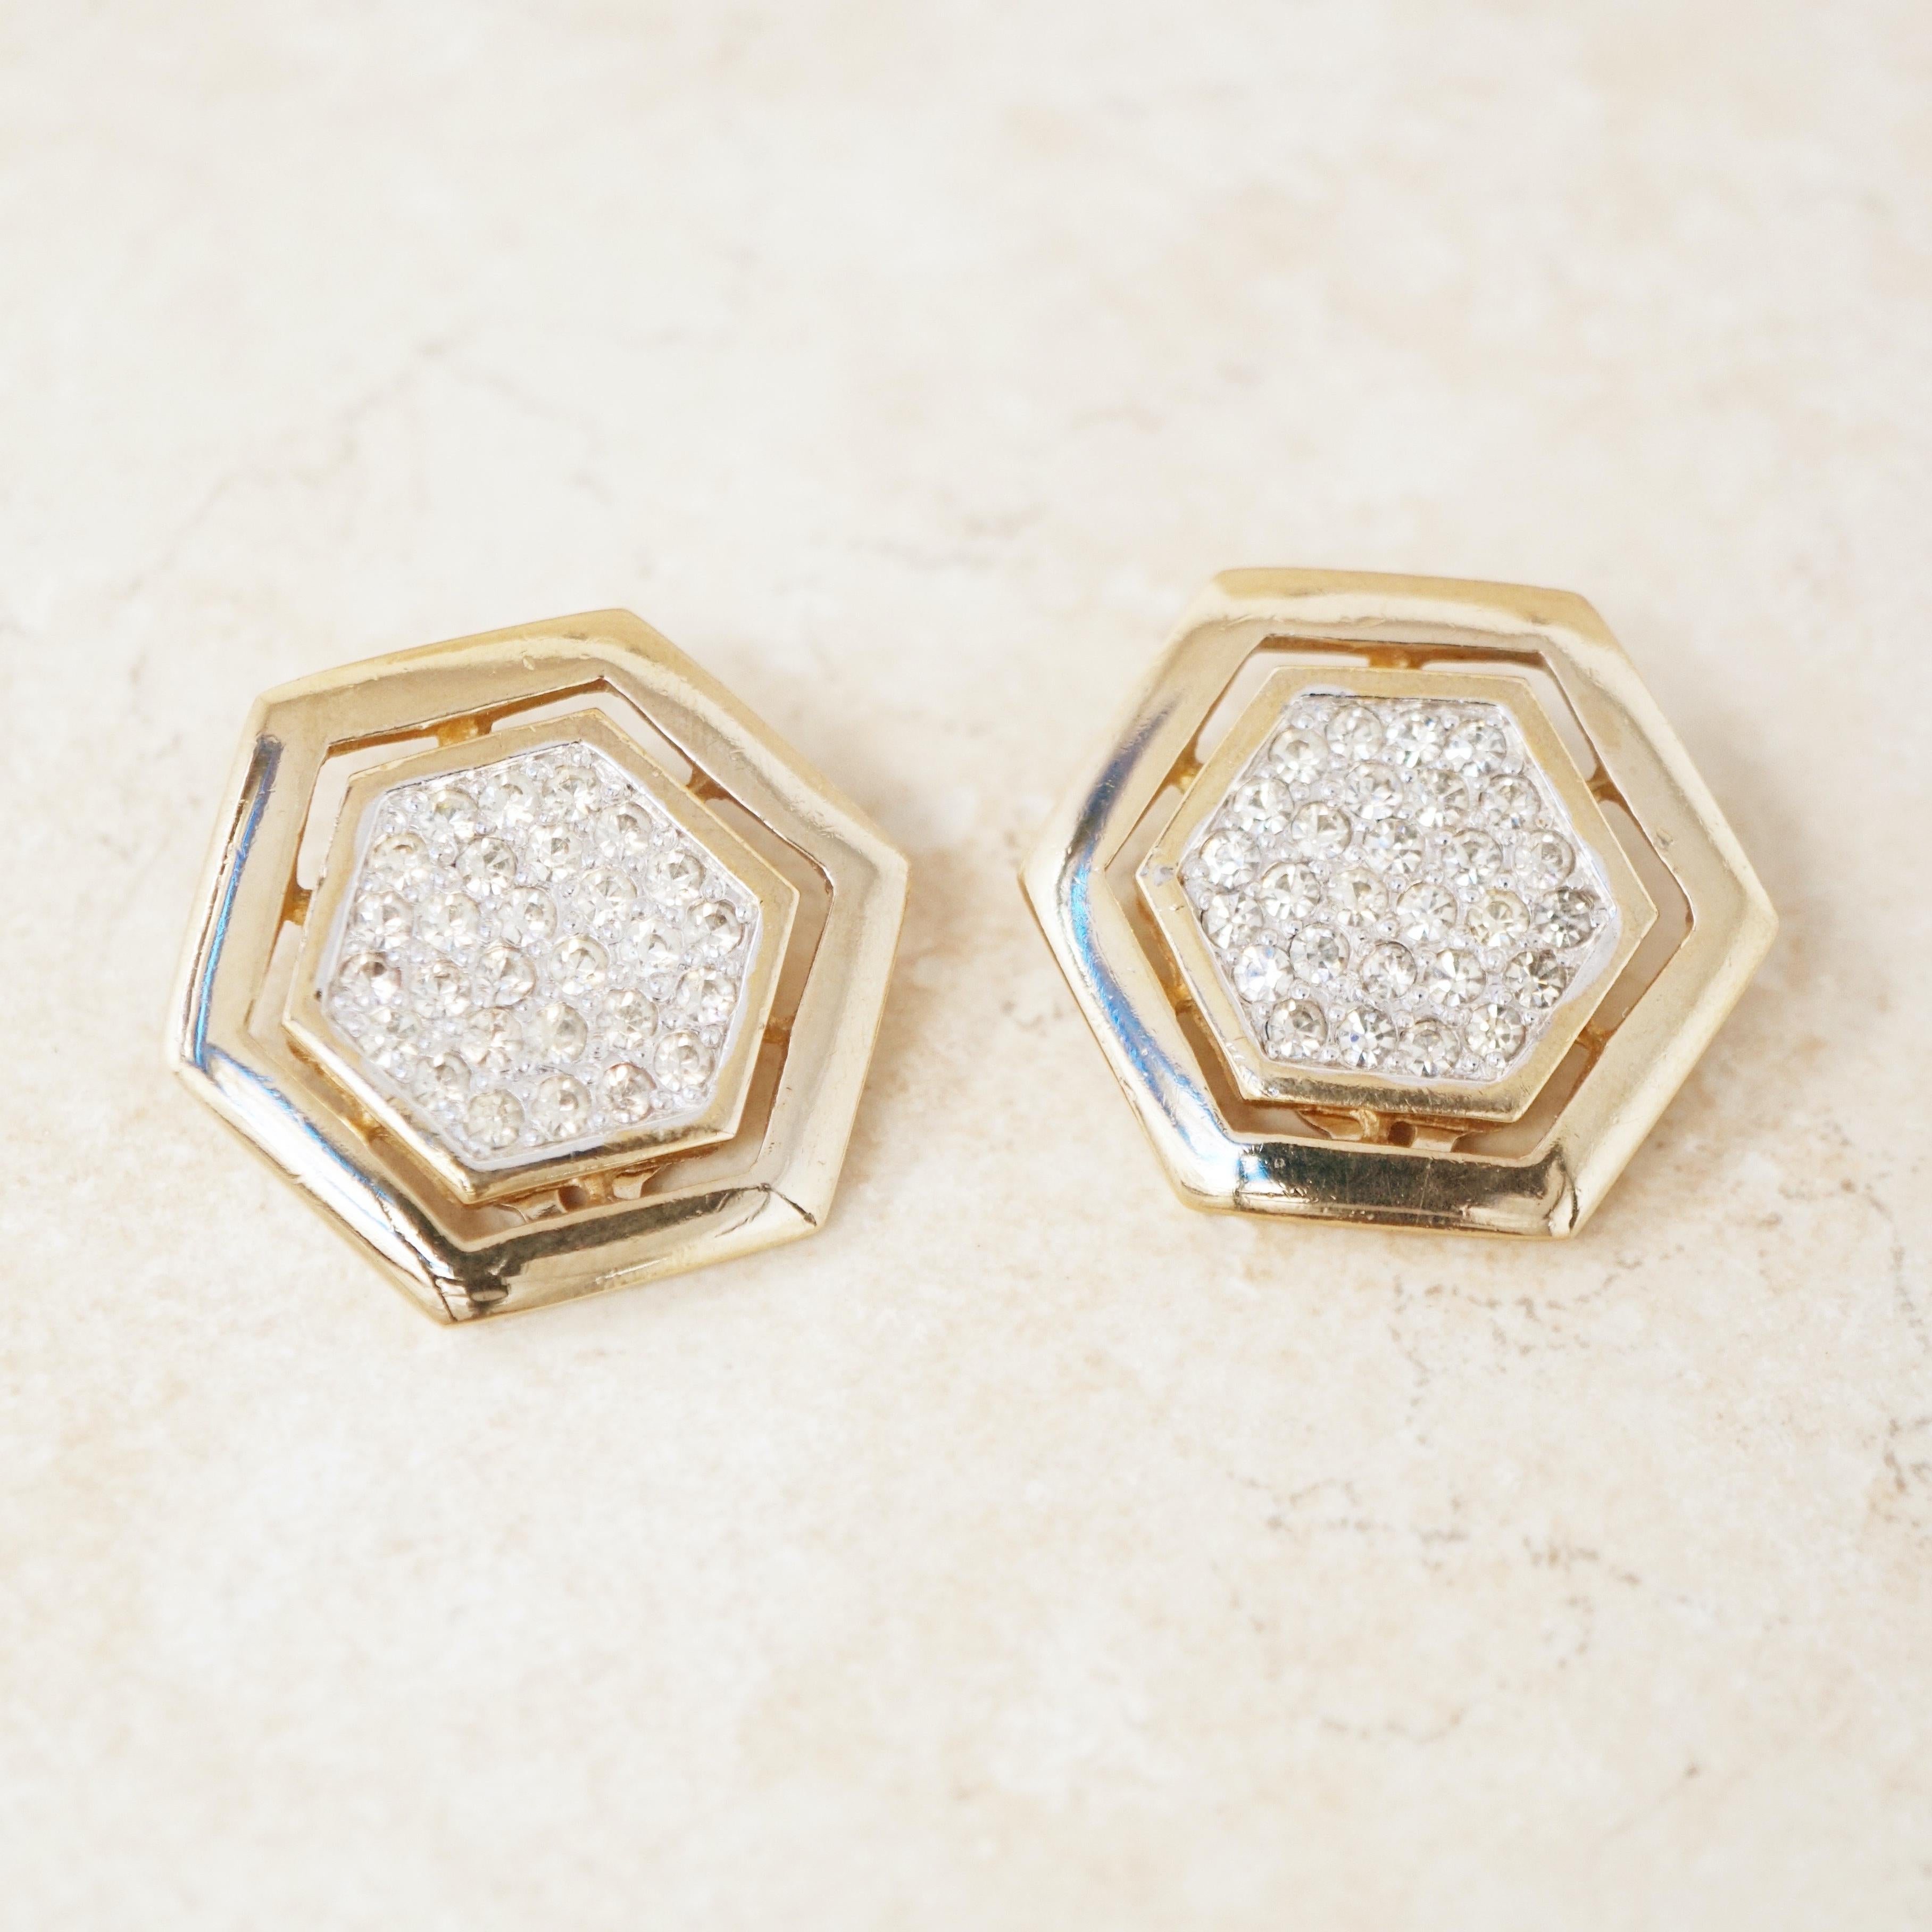 Vintage Gilded Hexagon Statement Earrings with Crystal Pavé by Panetta, 1980s For Sale 2